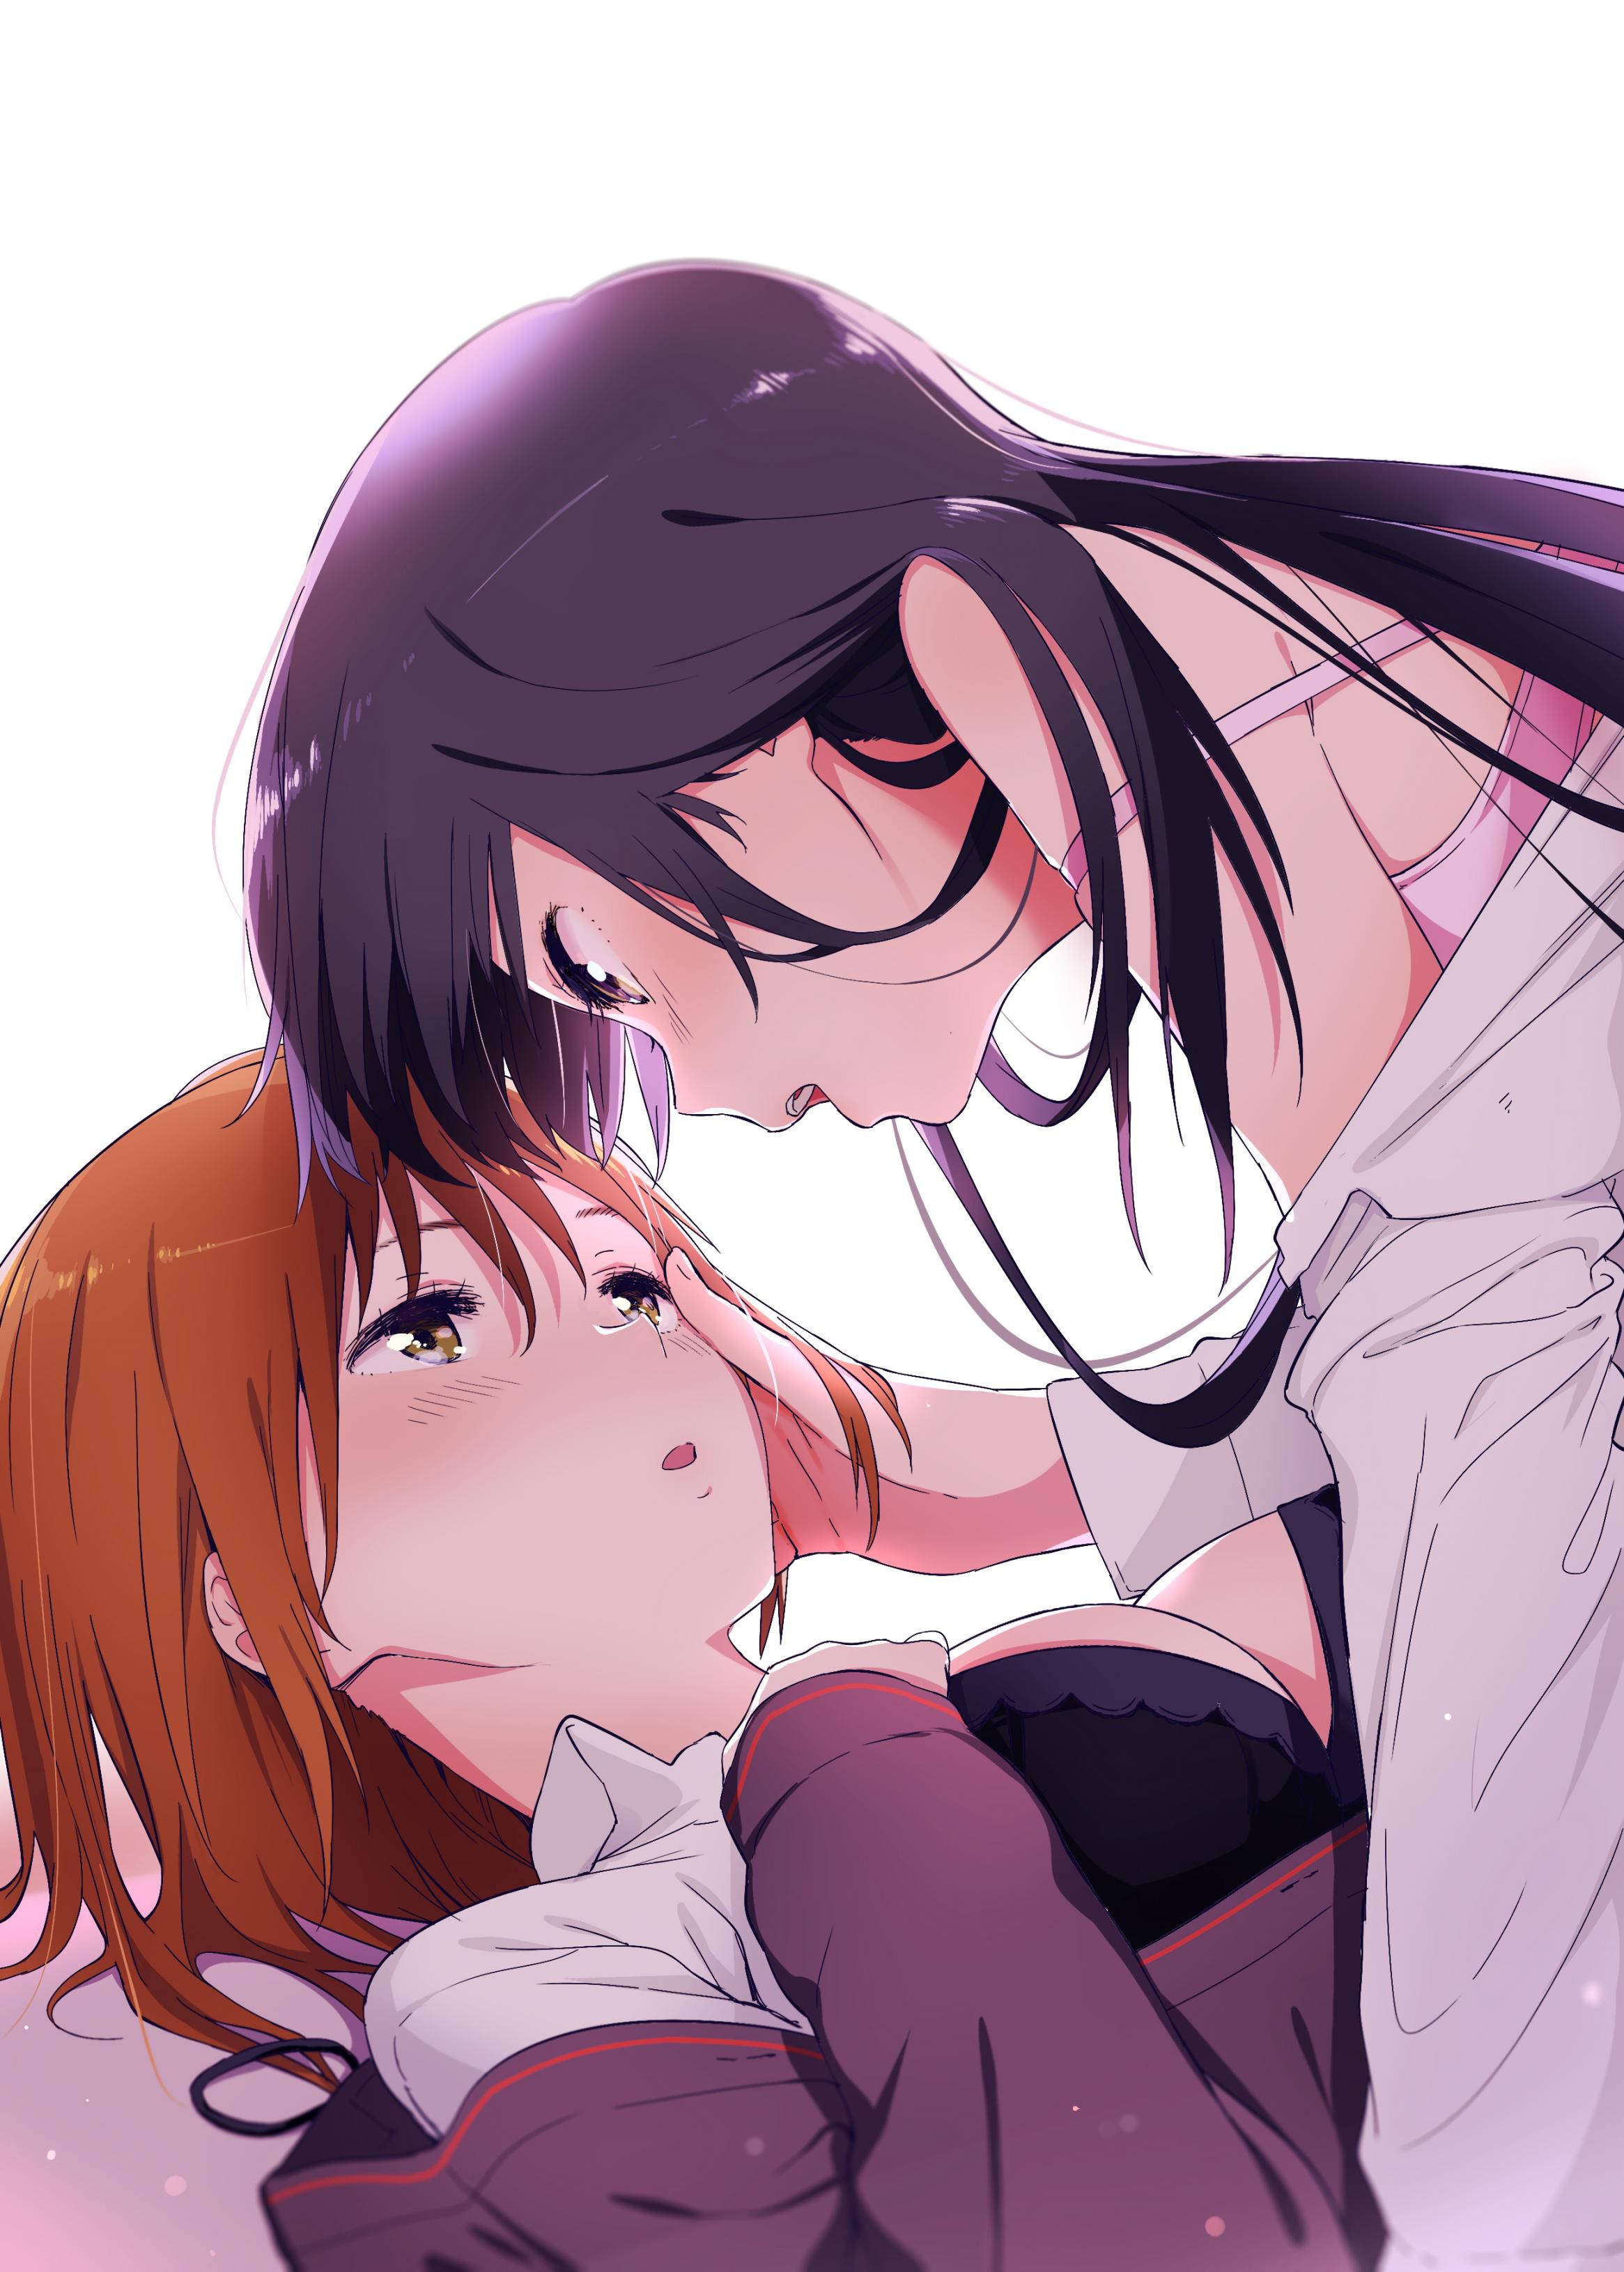 Forbidden Men!! The second erotic image of beautiful yuri and lesbian wwww part4 20